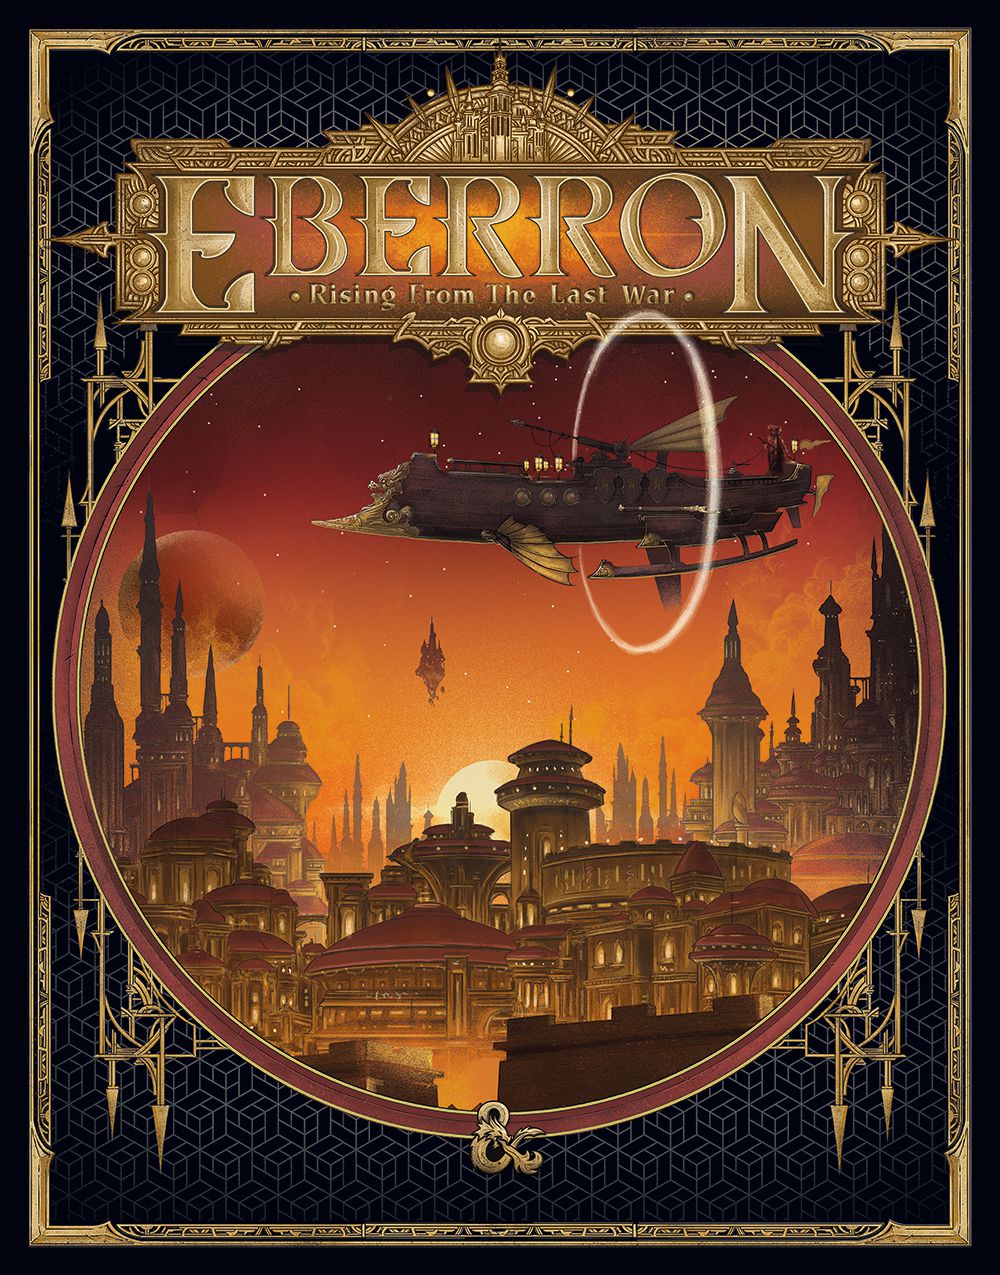 An alternate cover for Eberron shows an airship sailing of an exotic, gilded city at sunset.